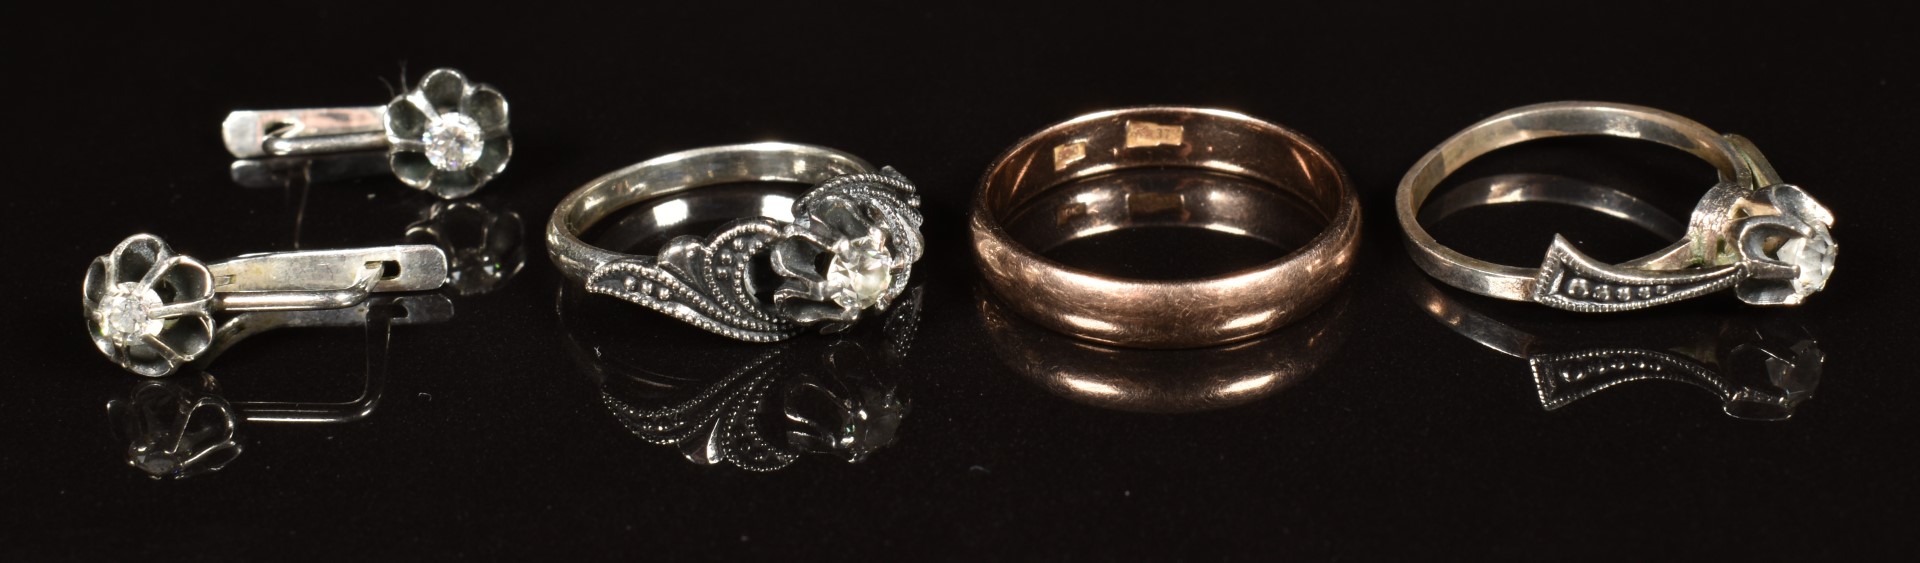 A 9ct gold wedding band / ring (3.1g) and two silver rings and a pair of silver earrings - Image 2 of 2